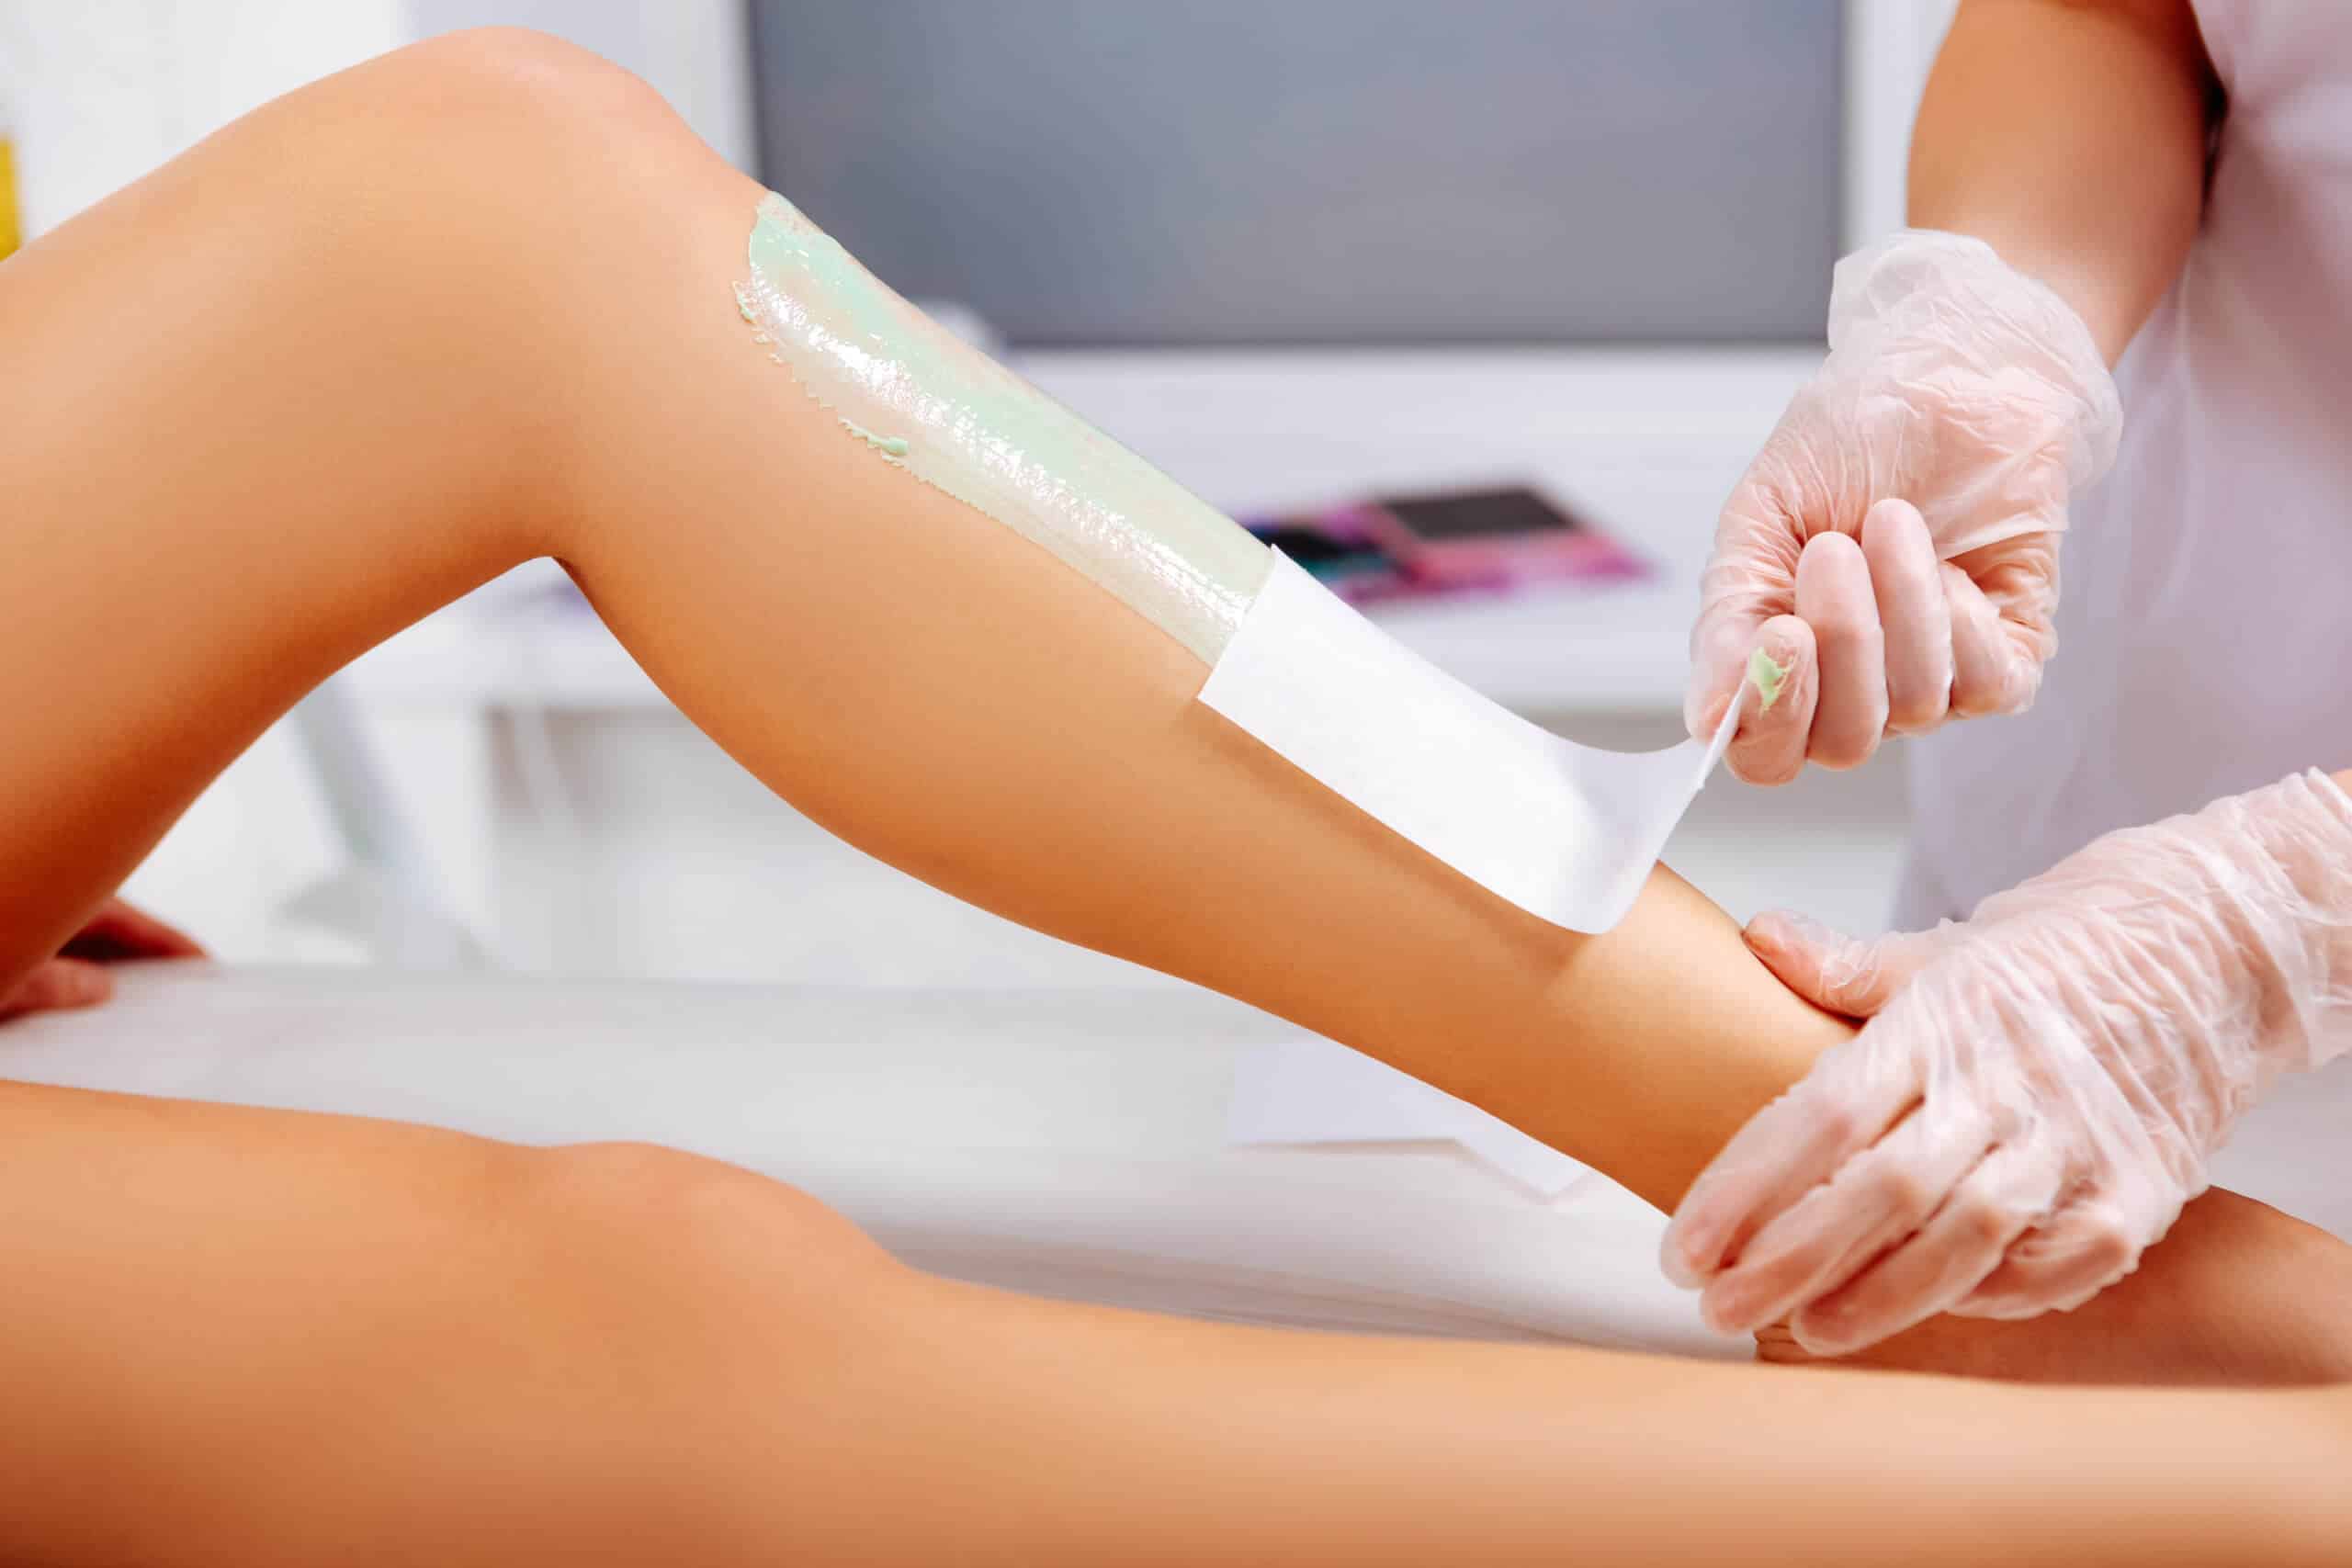 Does Waxing Reduce Hair Growth